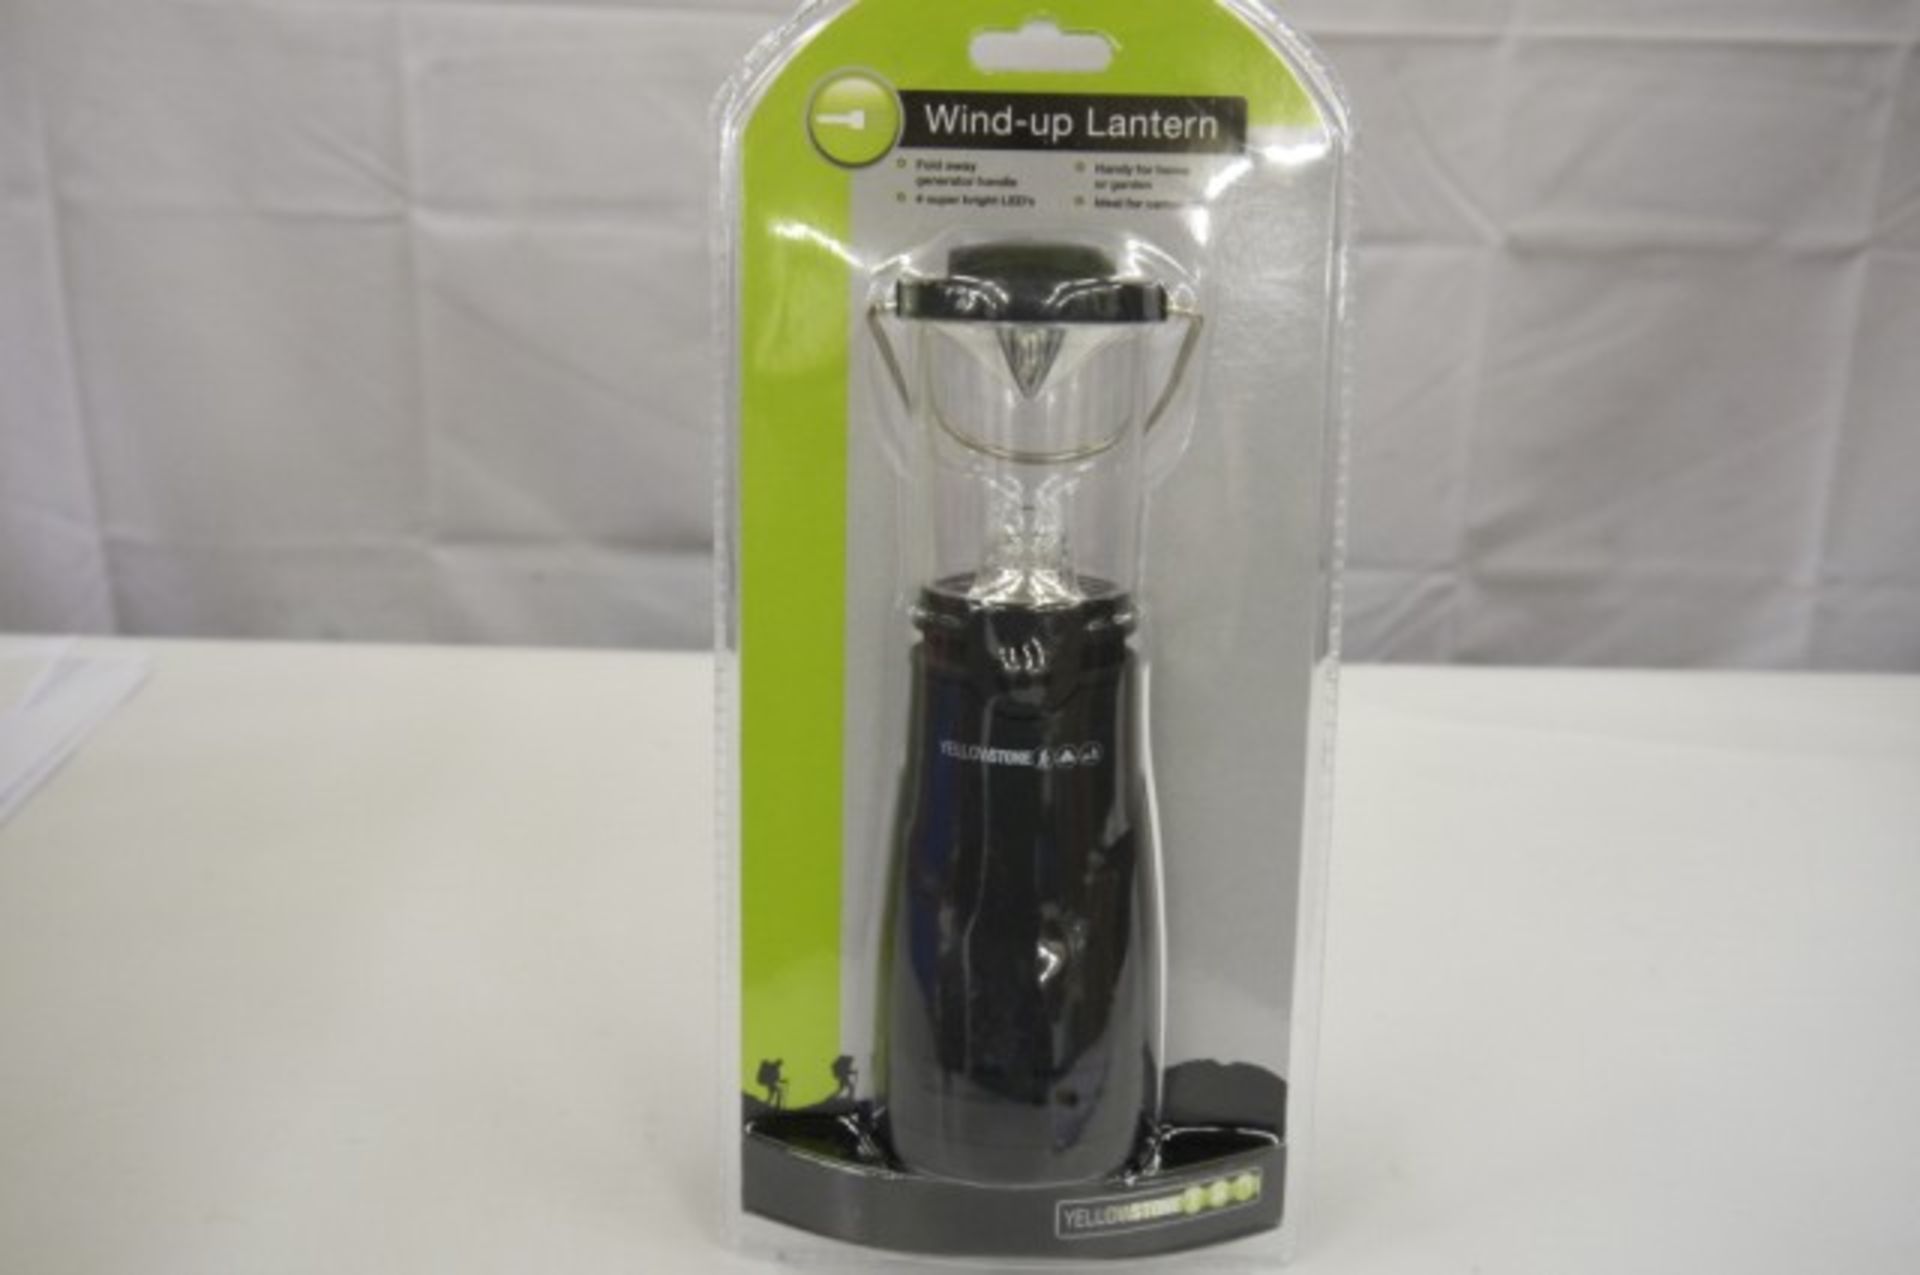 V Grade A 4 Super Bright LED Wind Up Lantern X 2 YOUR BID PRICE TO BE MULTIPLIED BY TWO